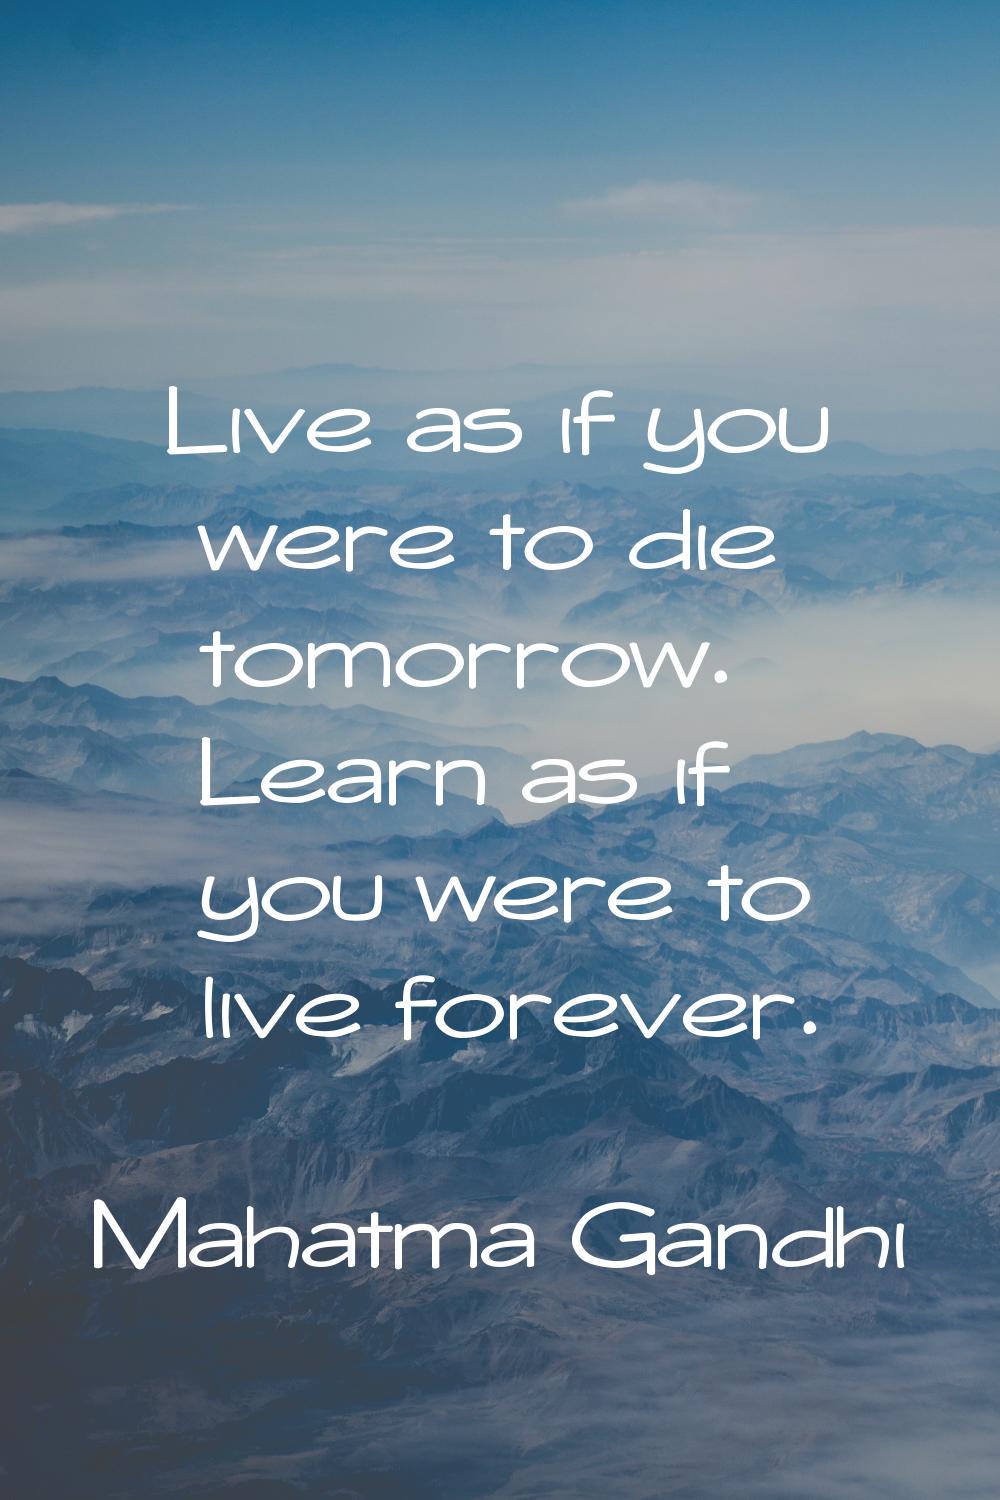 Live as if you were to die tomorrow. Learn as if you were to live forever.